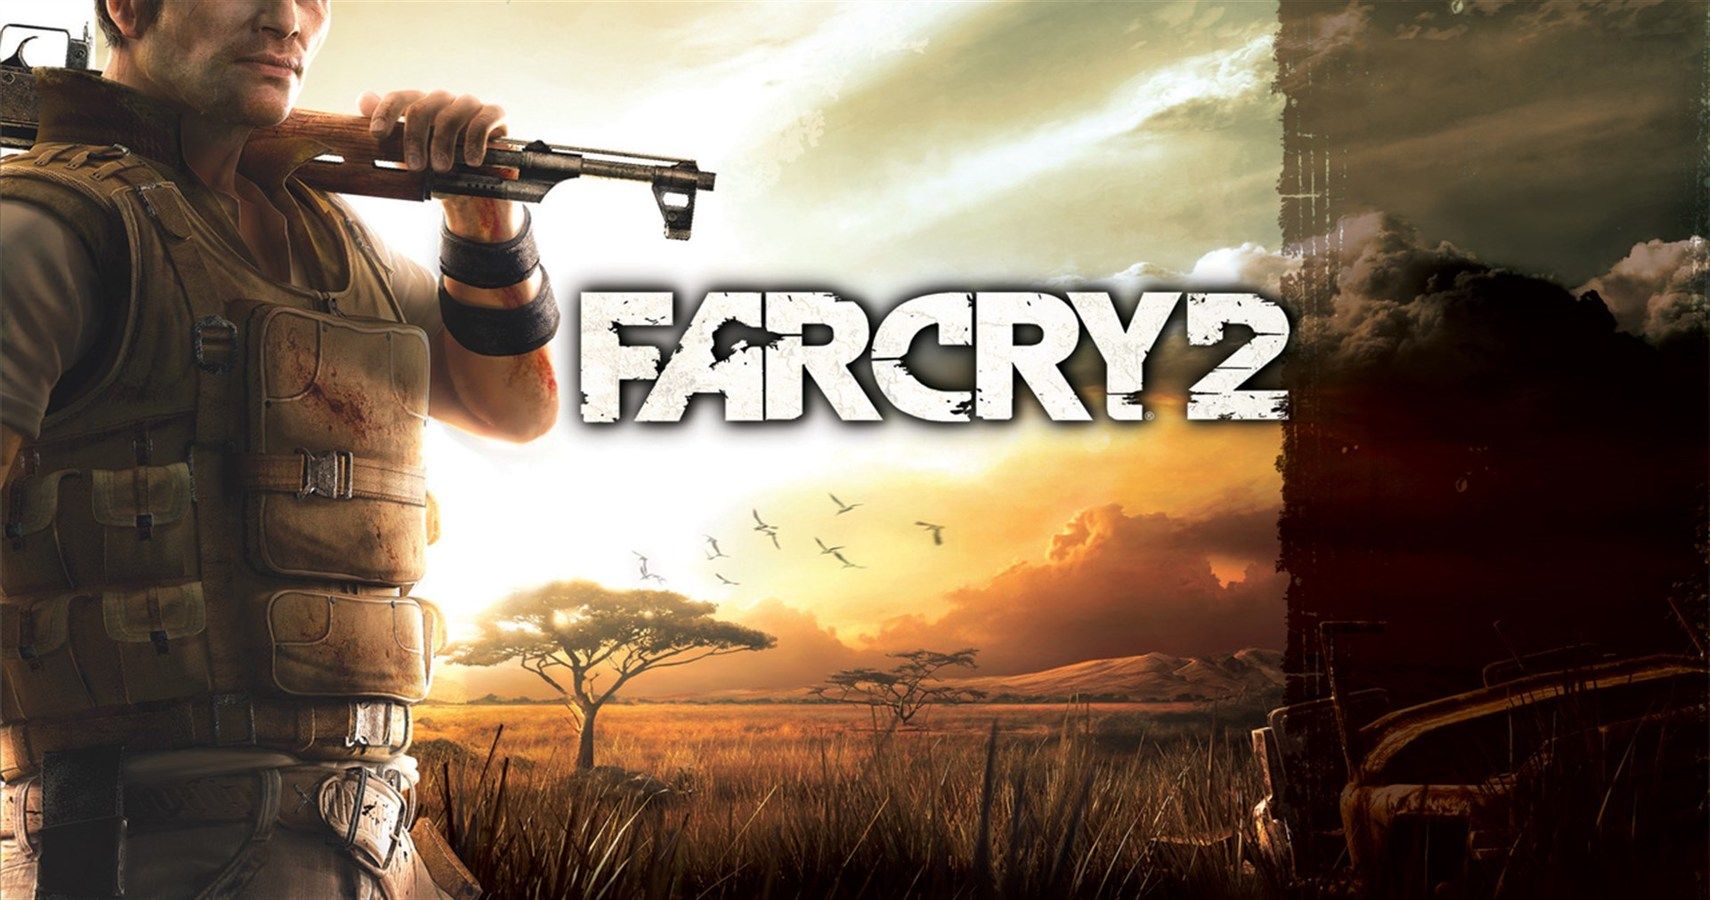 Far Cry 2 works so well because it's 'broken